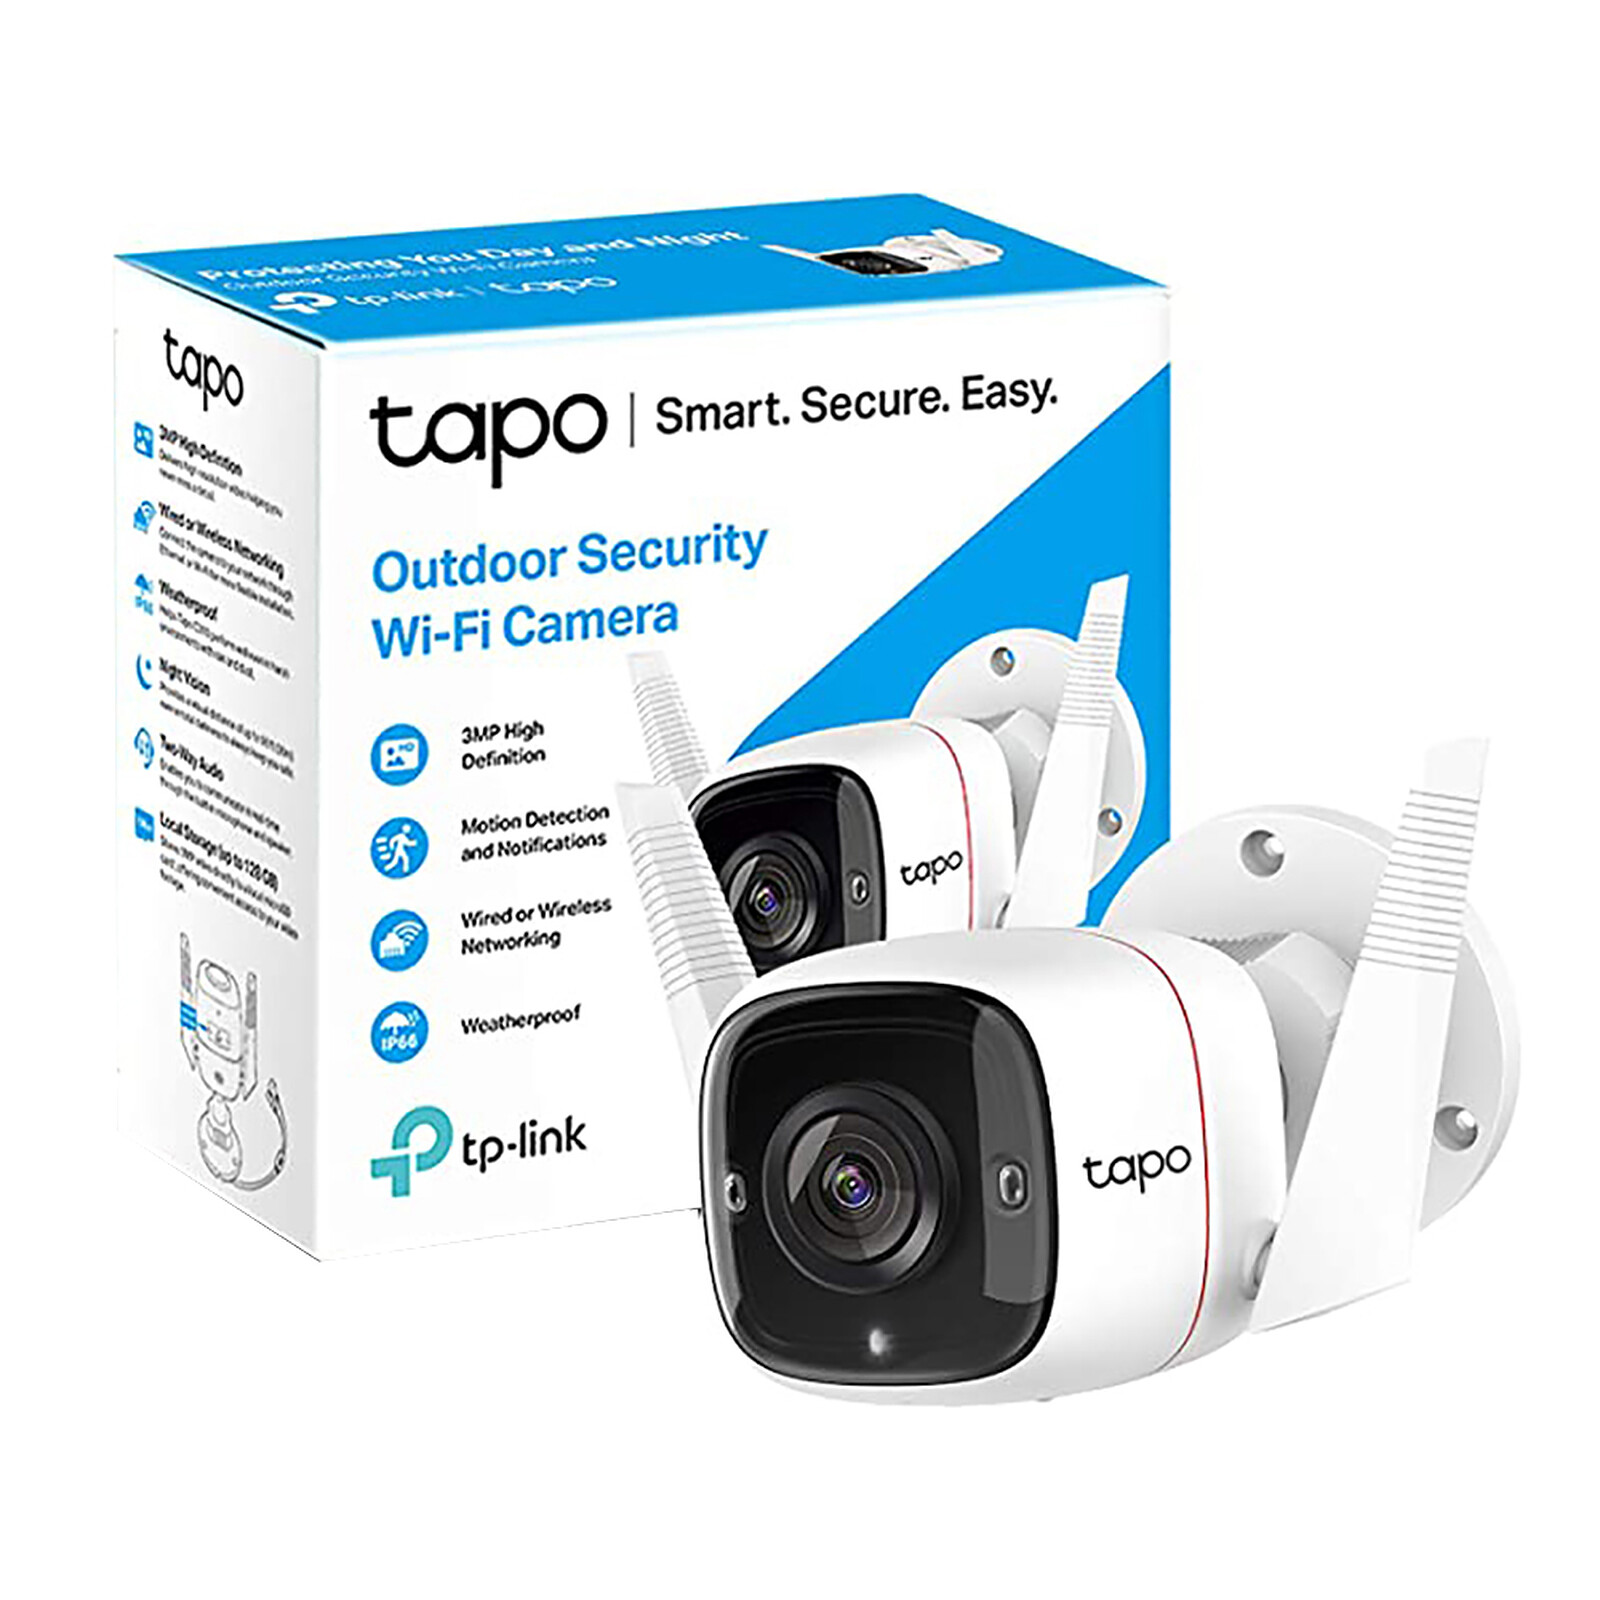 TP-LINK 1080p H.264 Home Security Wi-Fi Camera, Tapo C100 - The